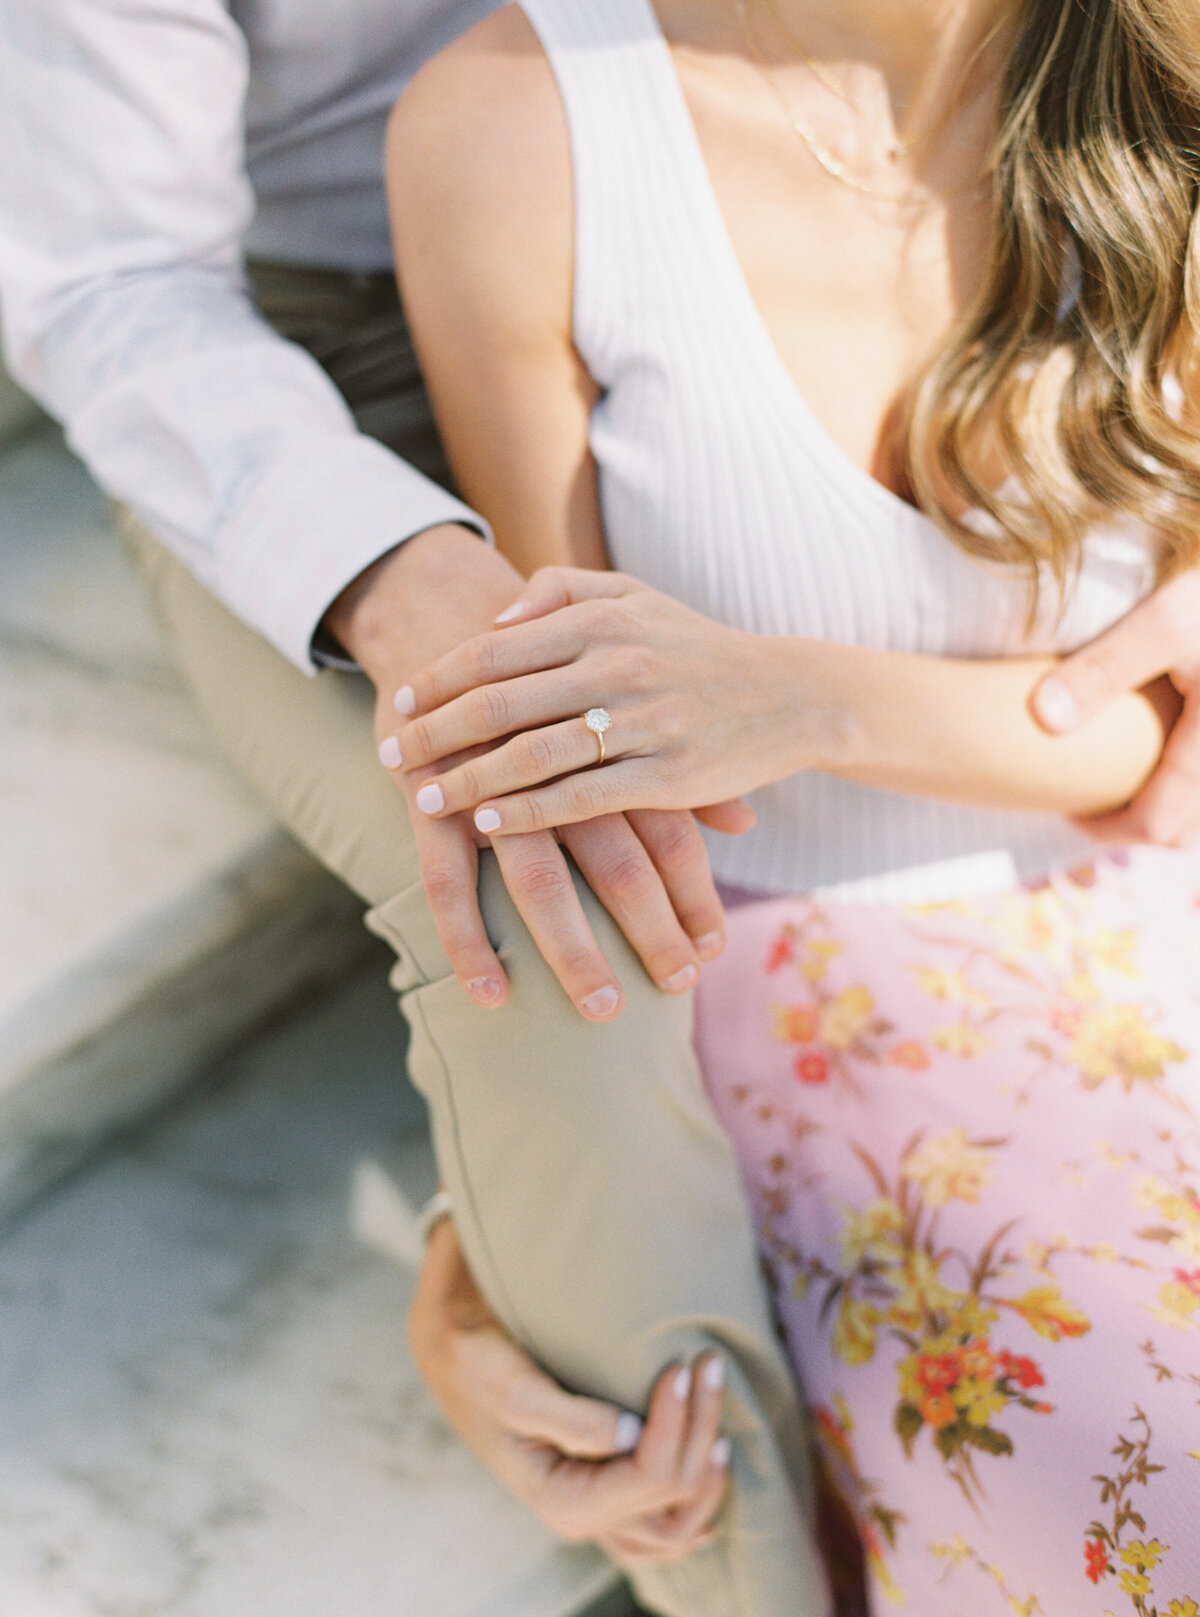 film_Engagement_ring_floral_skirt_charleston_kailee_dimeglio_photography-92